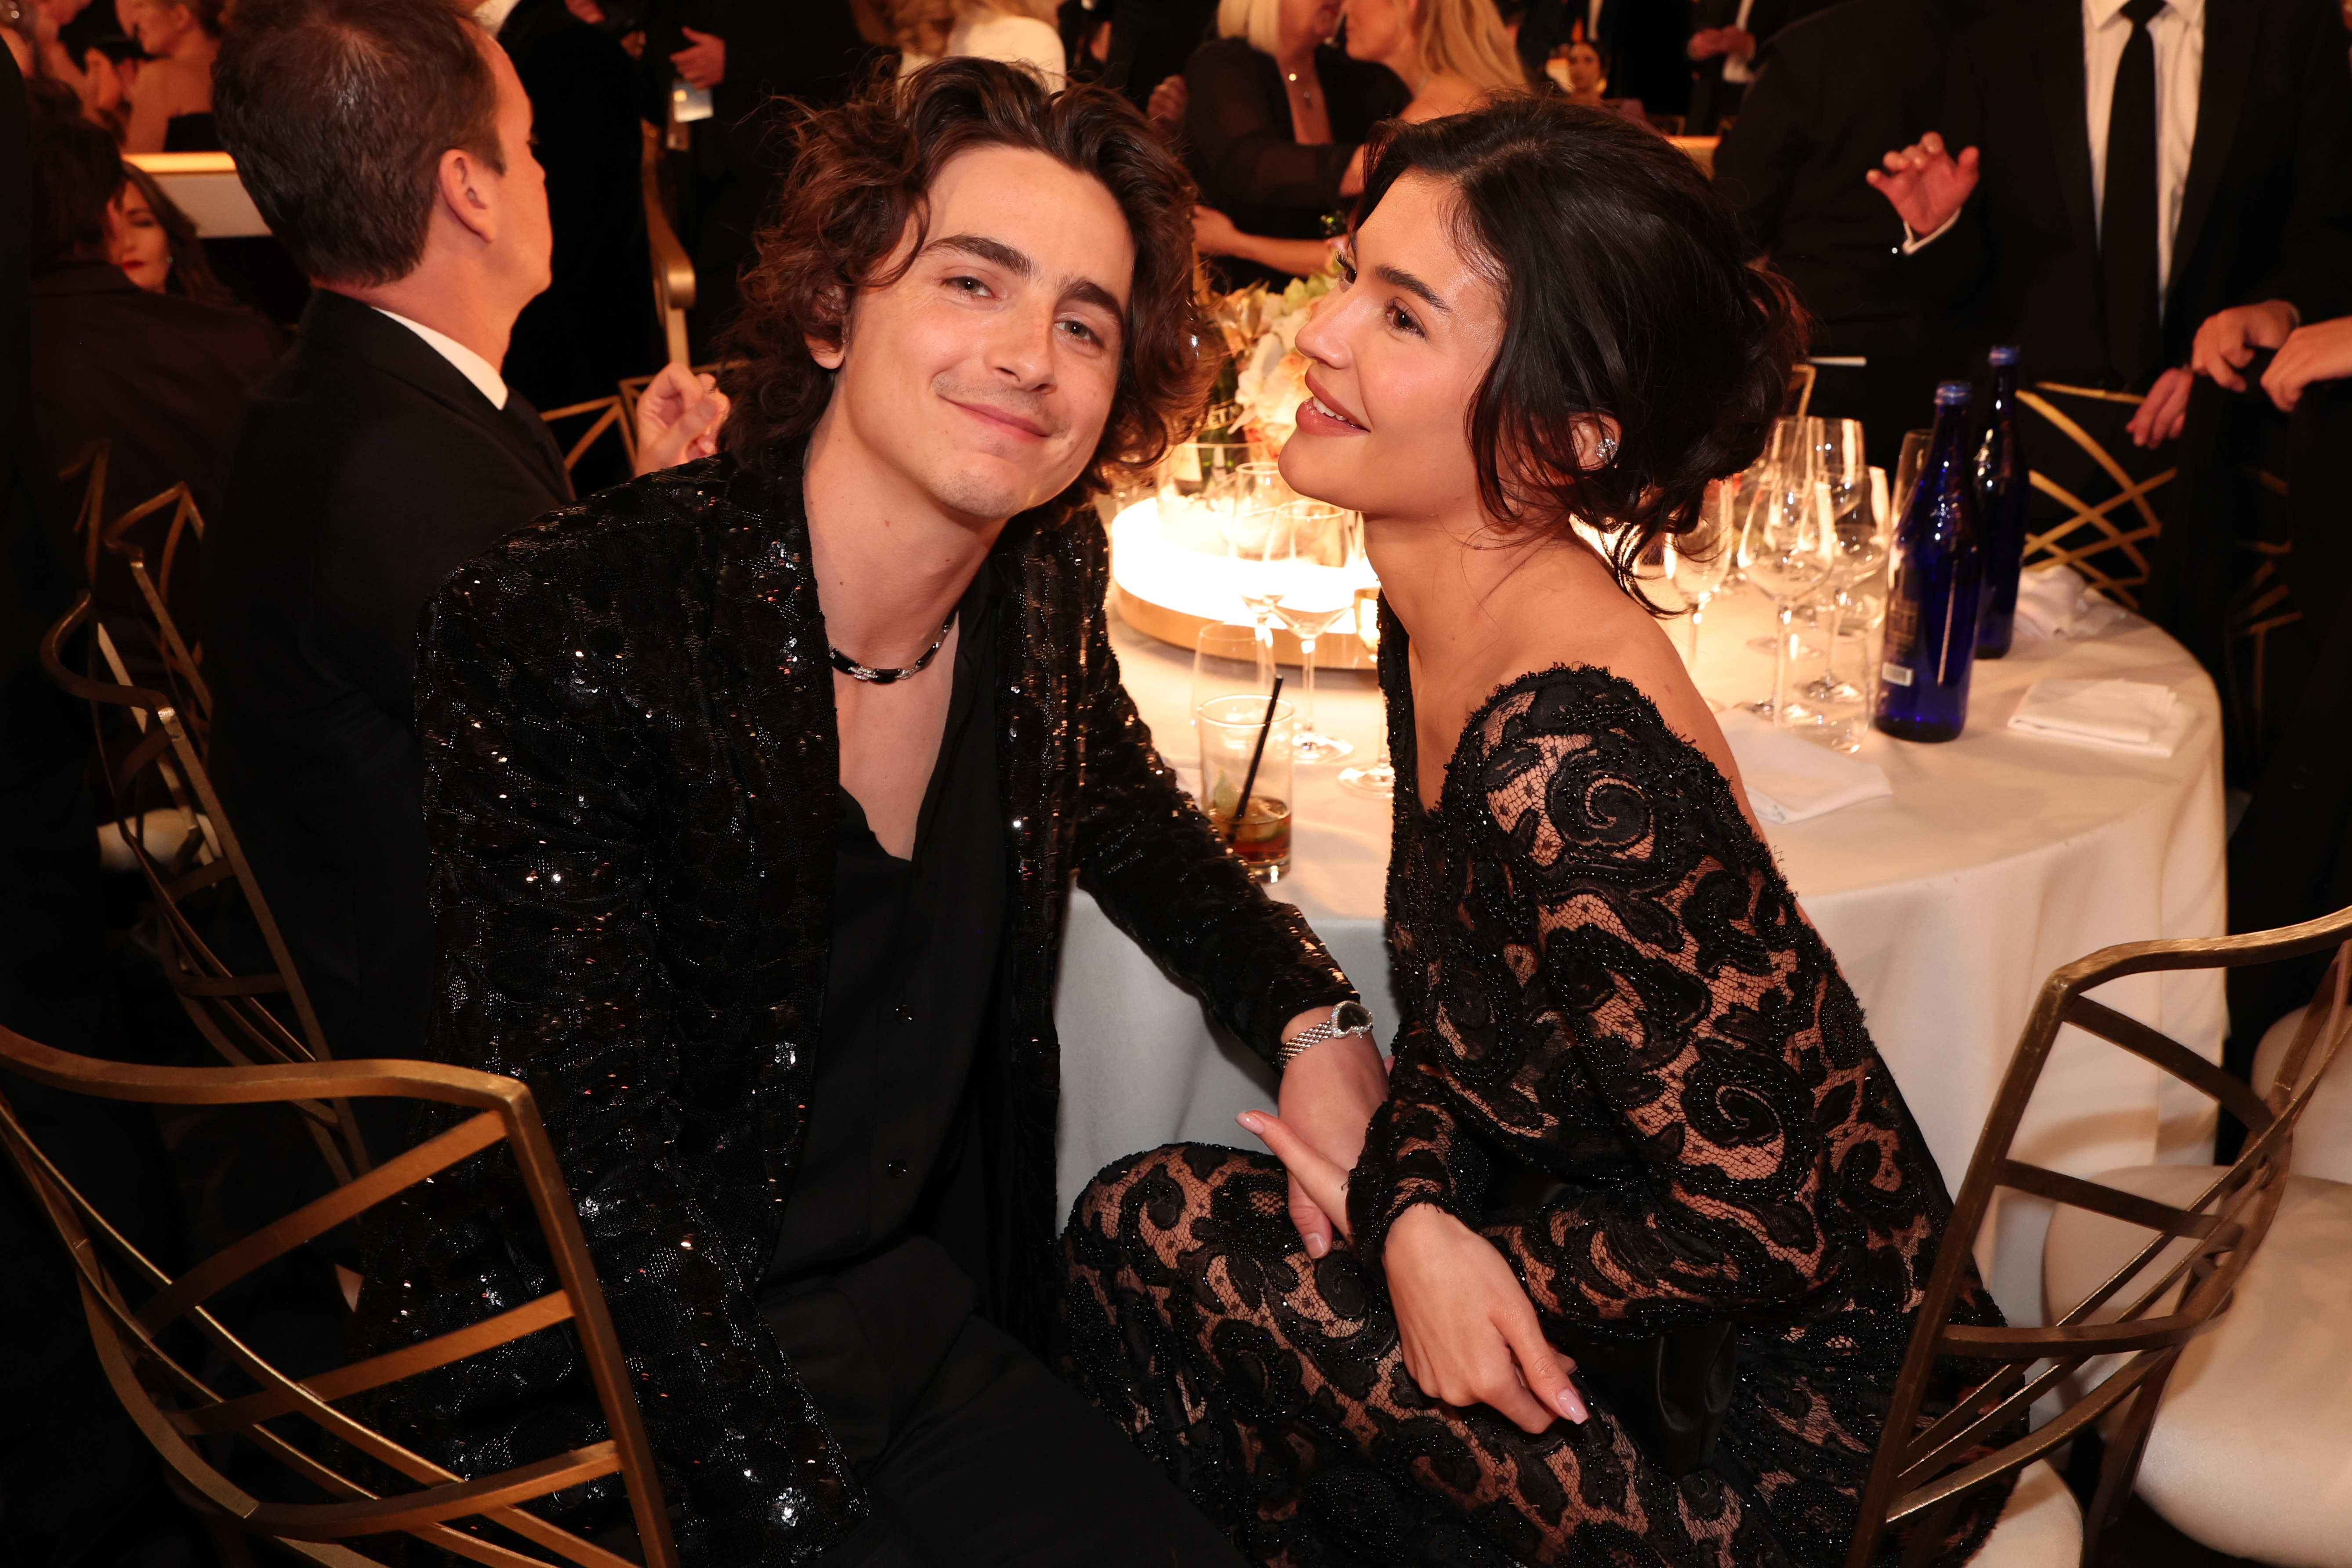 The last time Timothee and Kylie were spotted together was at the Golden Globe Awards in January 2024